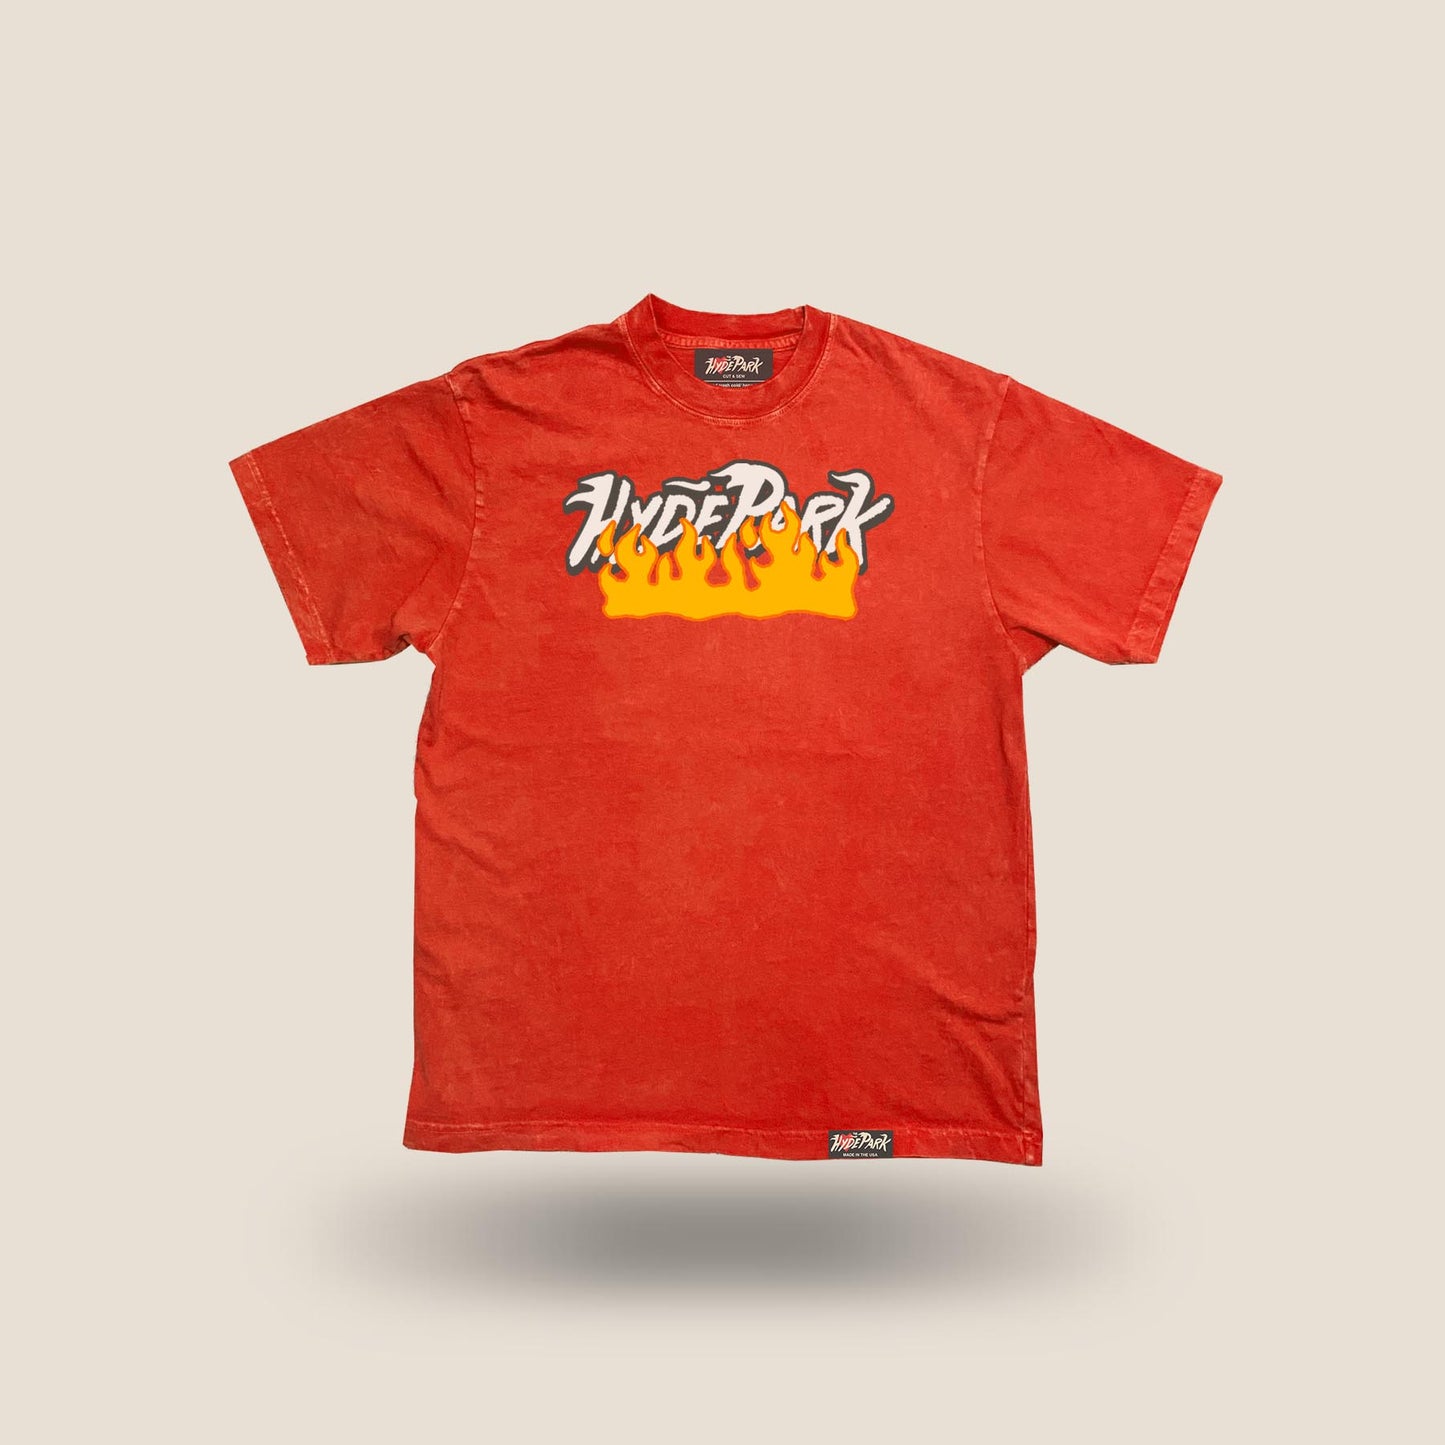 Rising From the Flames Tee